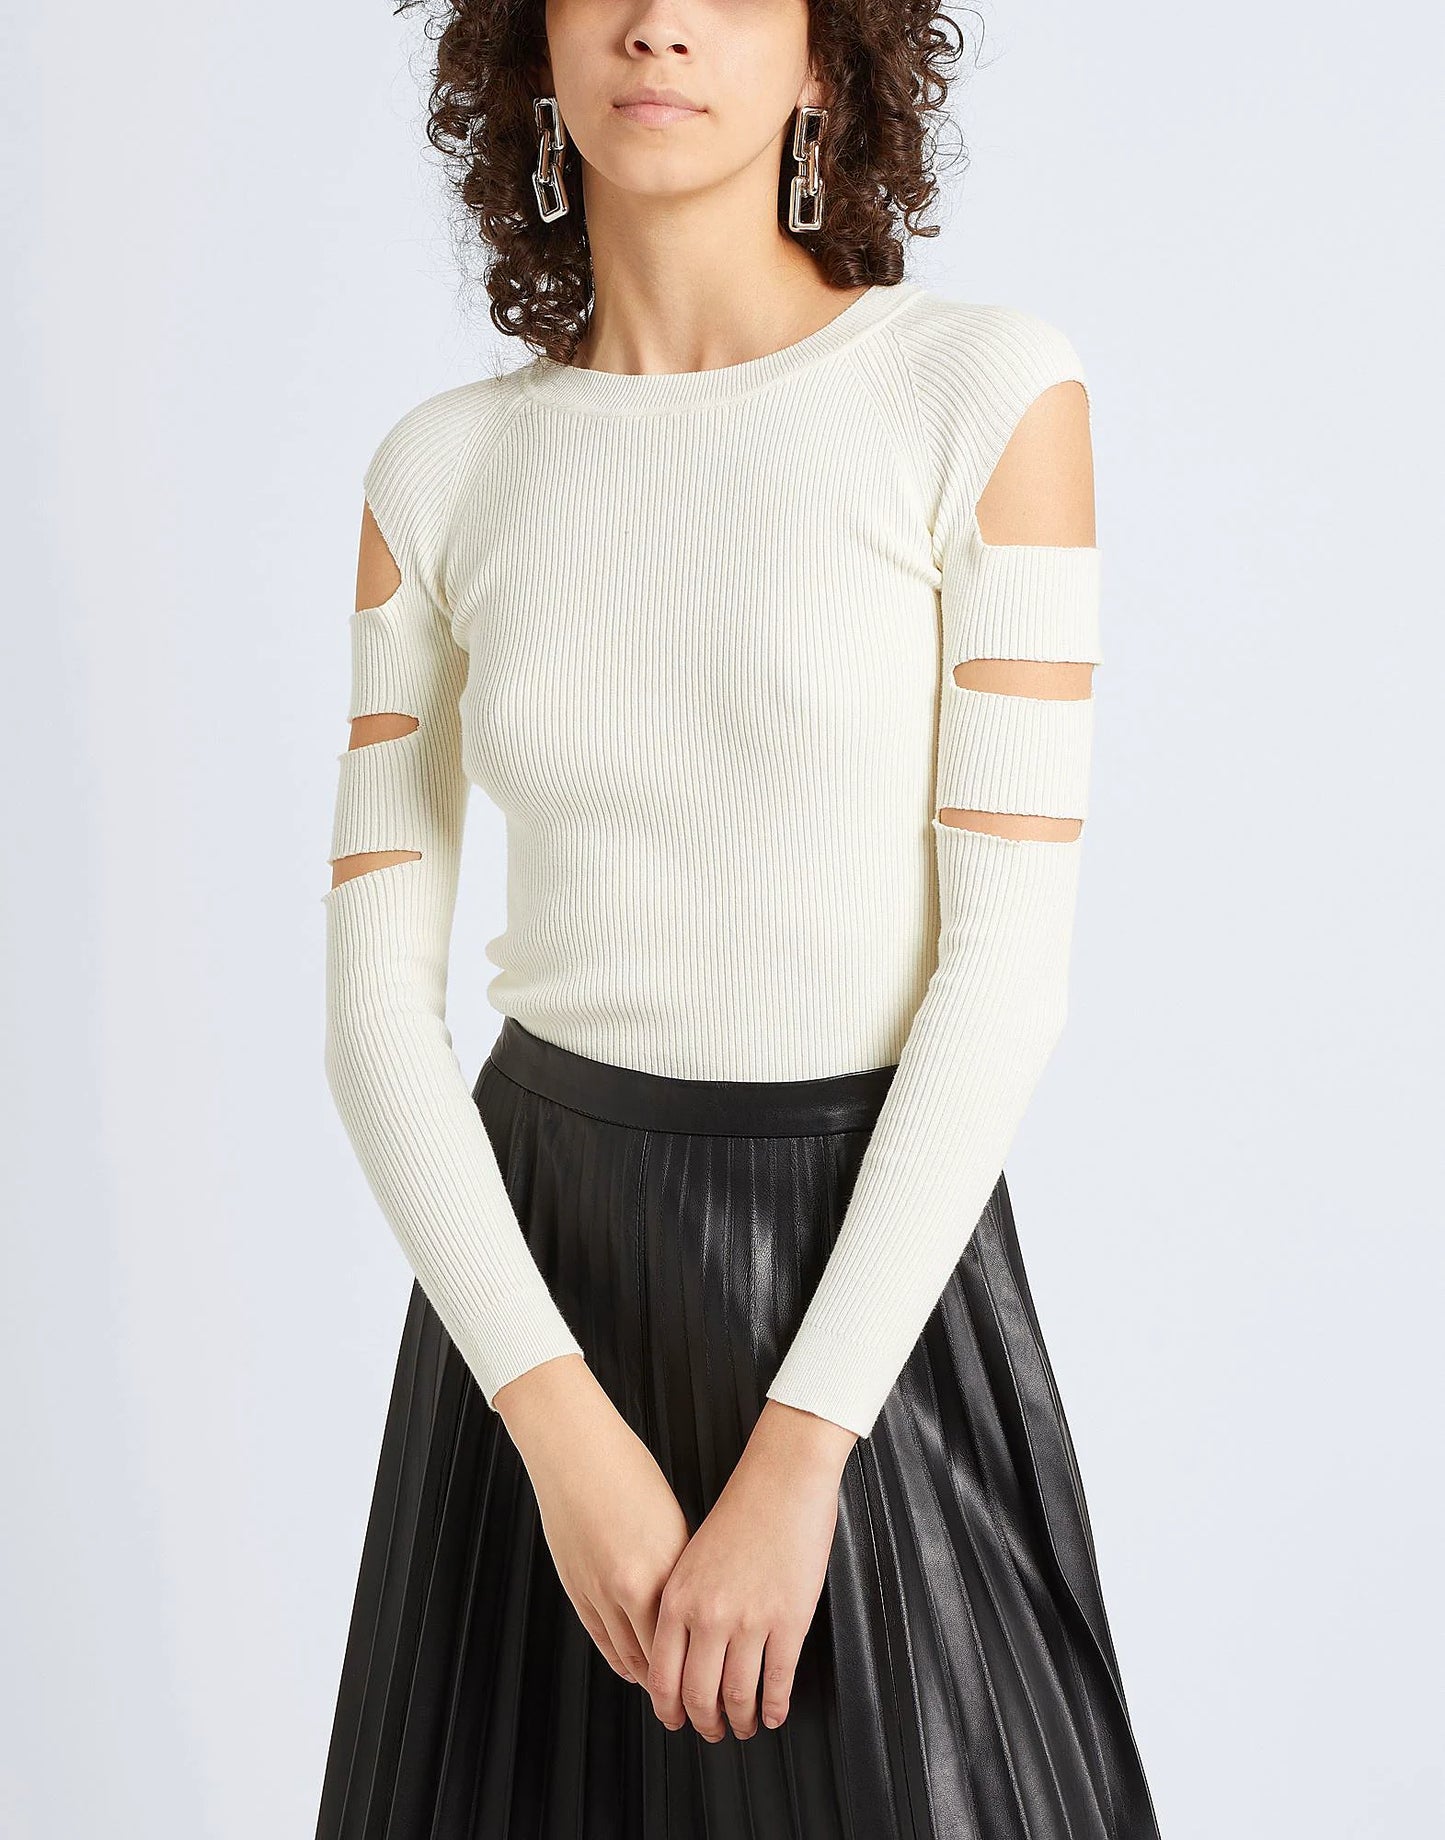 Ribbed Cotton Cut-Out Sweater